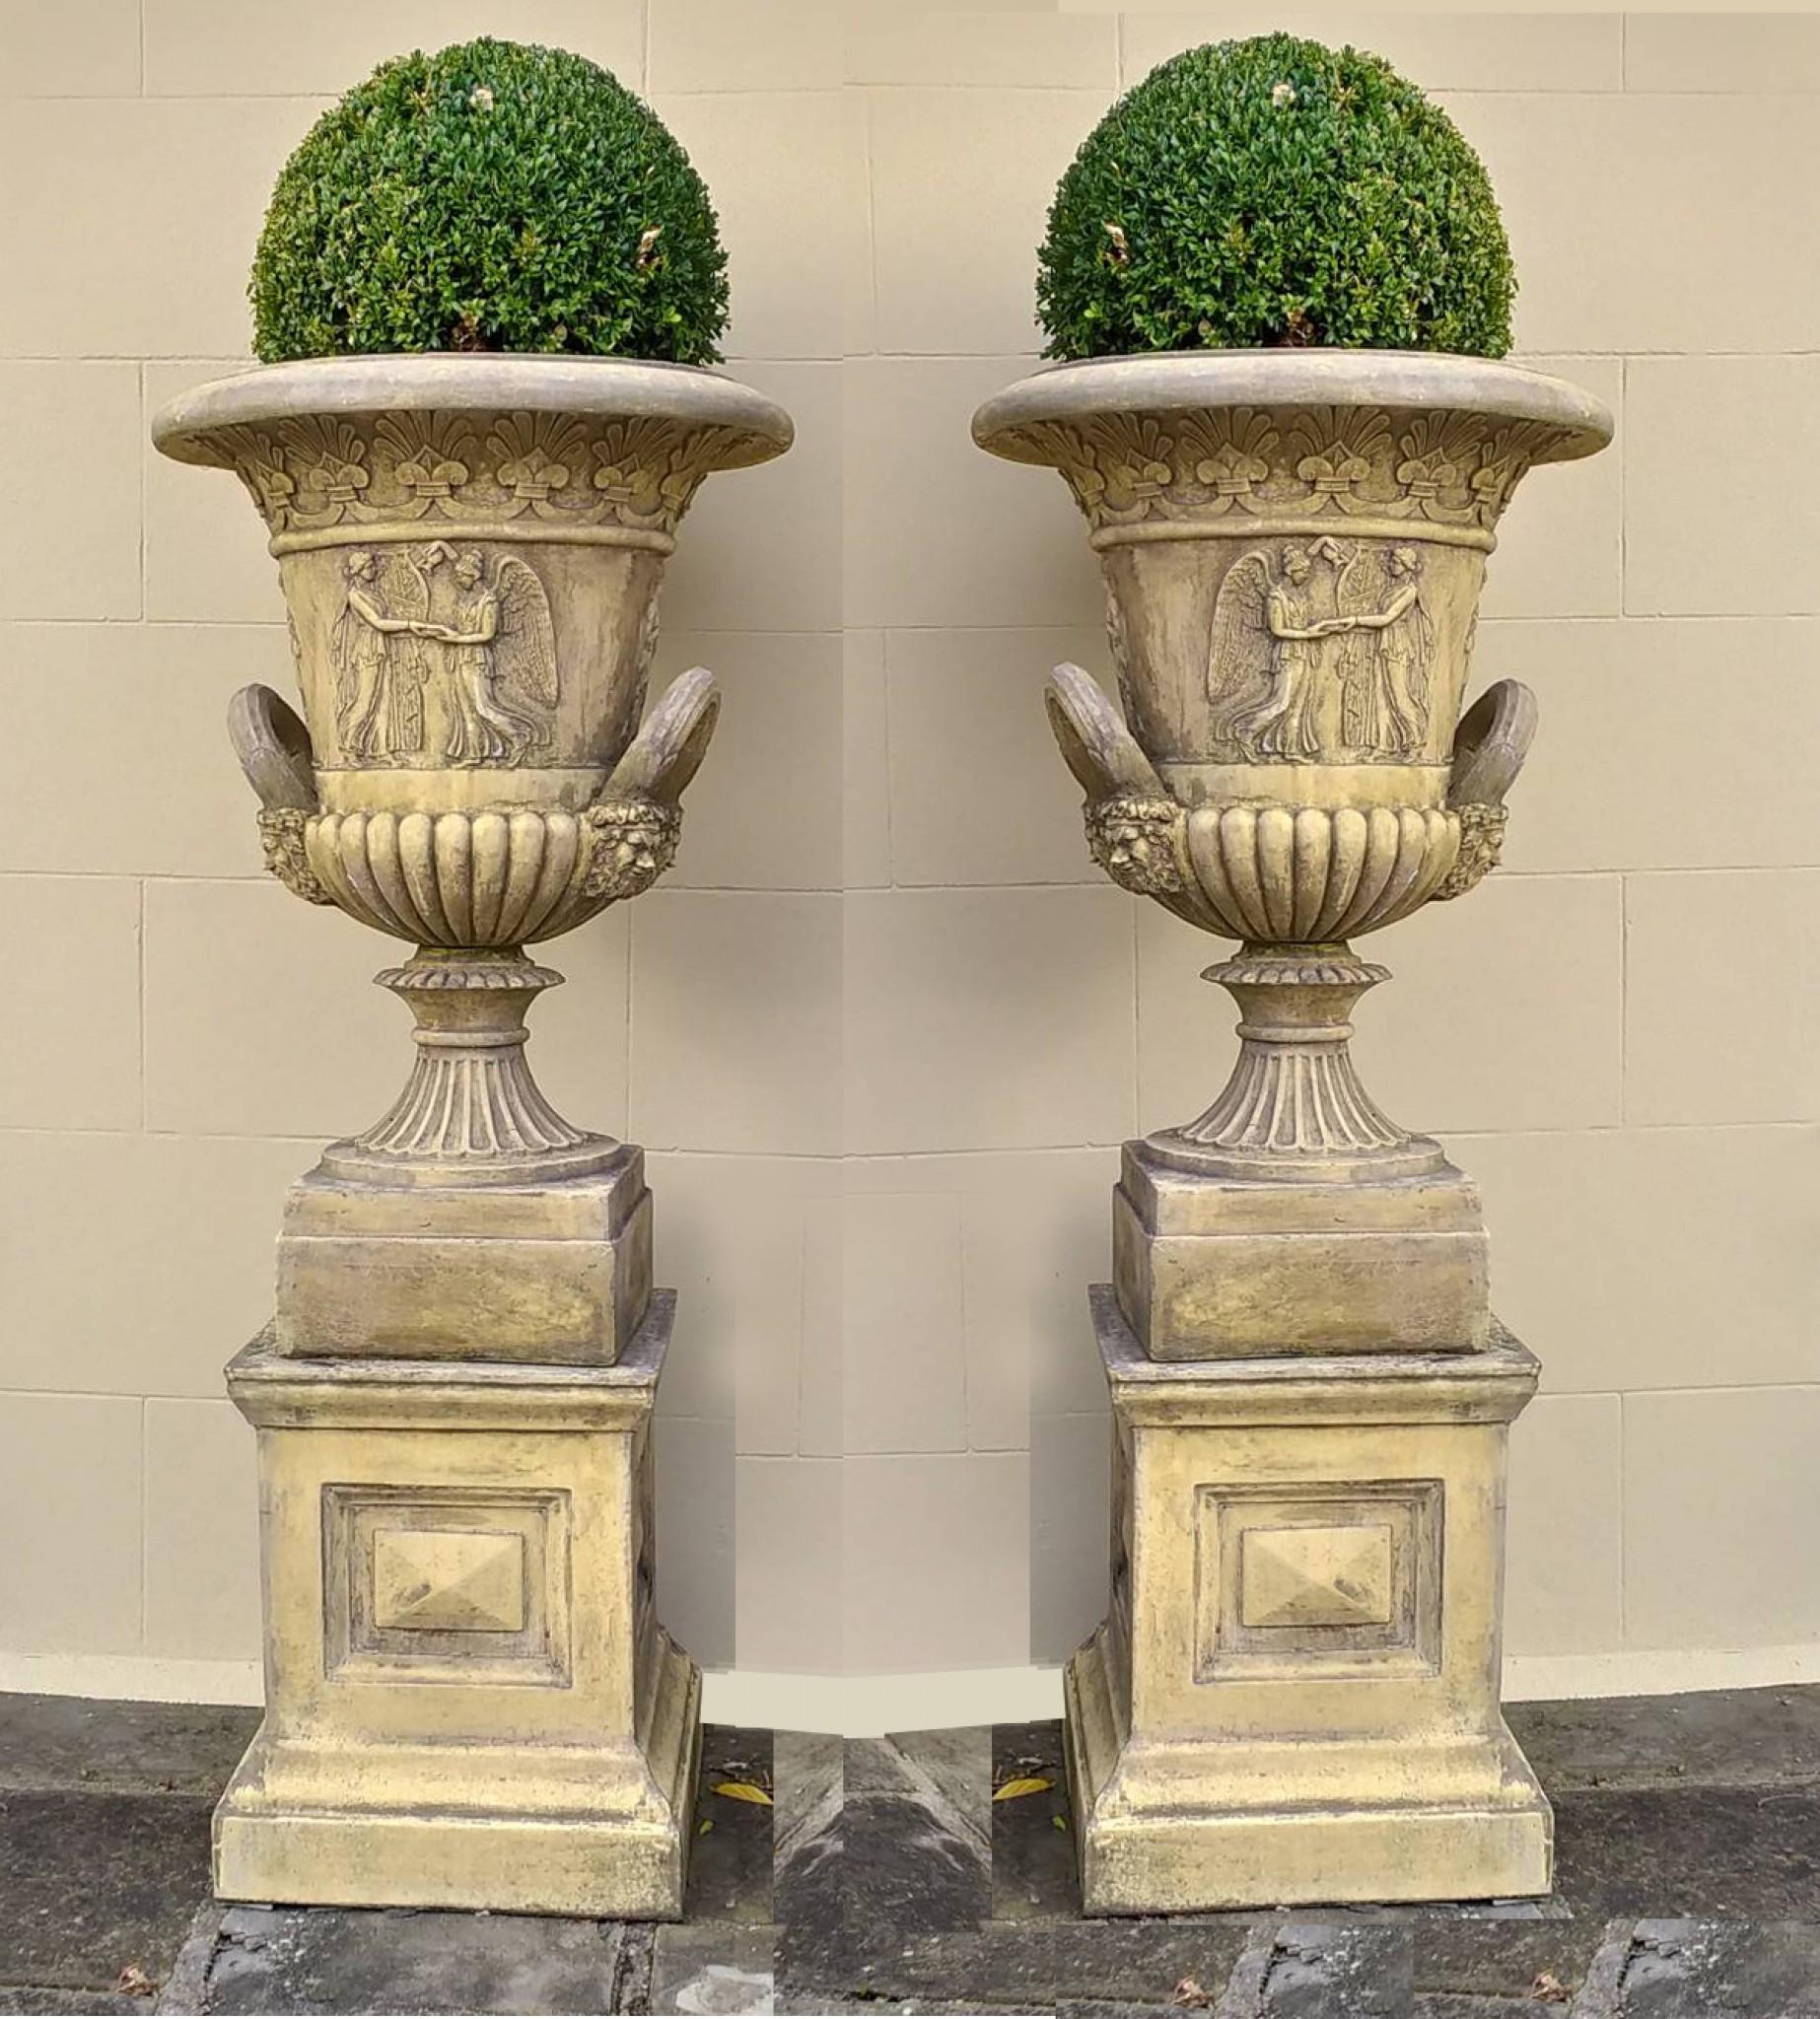 Pair gorgeous classical garden urns of campana form
Perfect for achieving that air of classical refinement in the classic English garden
These are in the manner of Thomas Hope who almost singlehandedly defined the classic Regency look
Can you